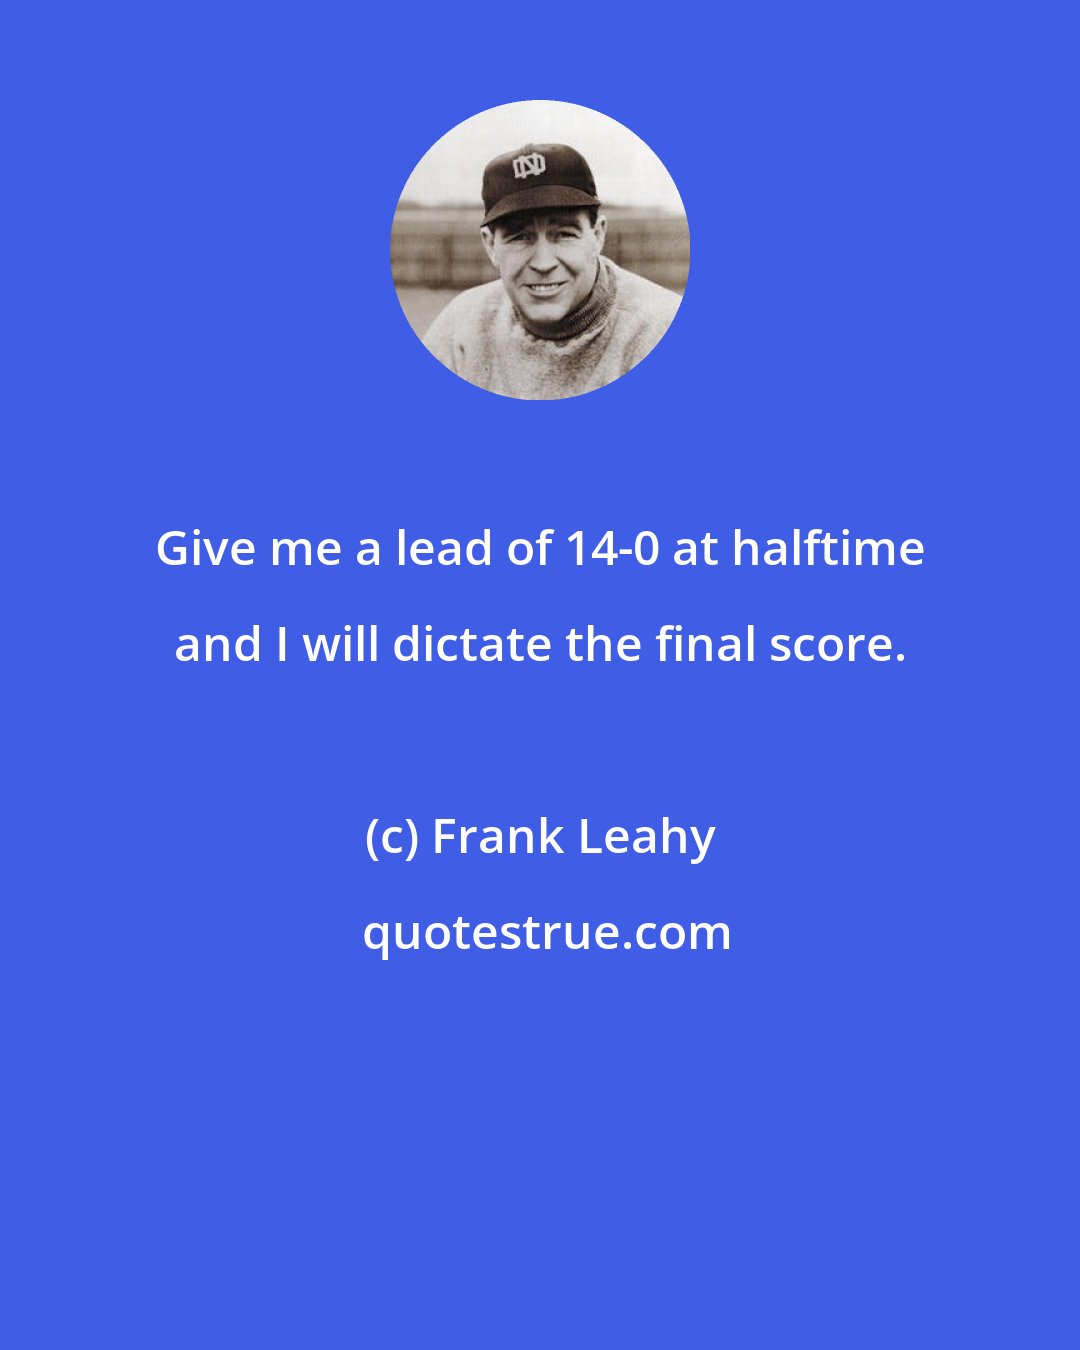 Frank Leahy: Give me a lead of 14-0 at halftime and I will dictate the final score.